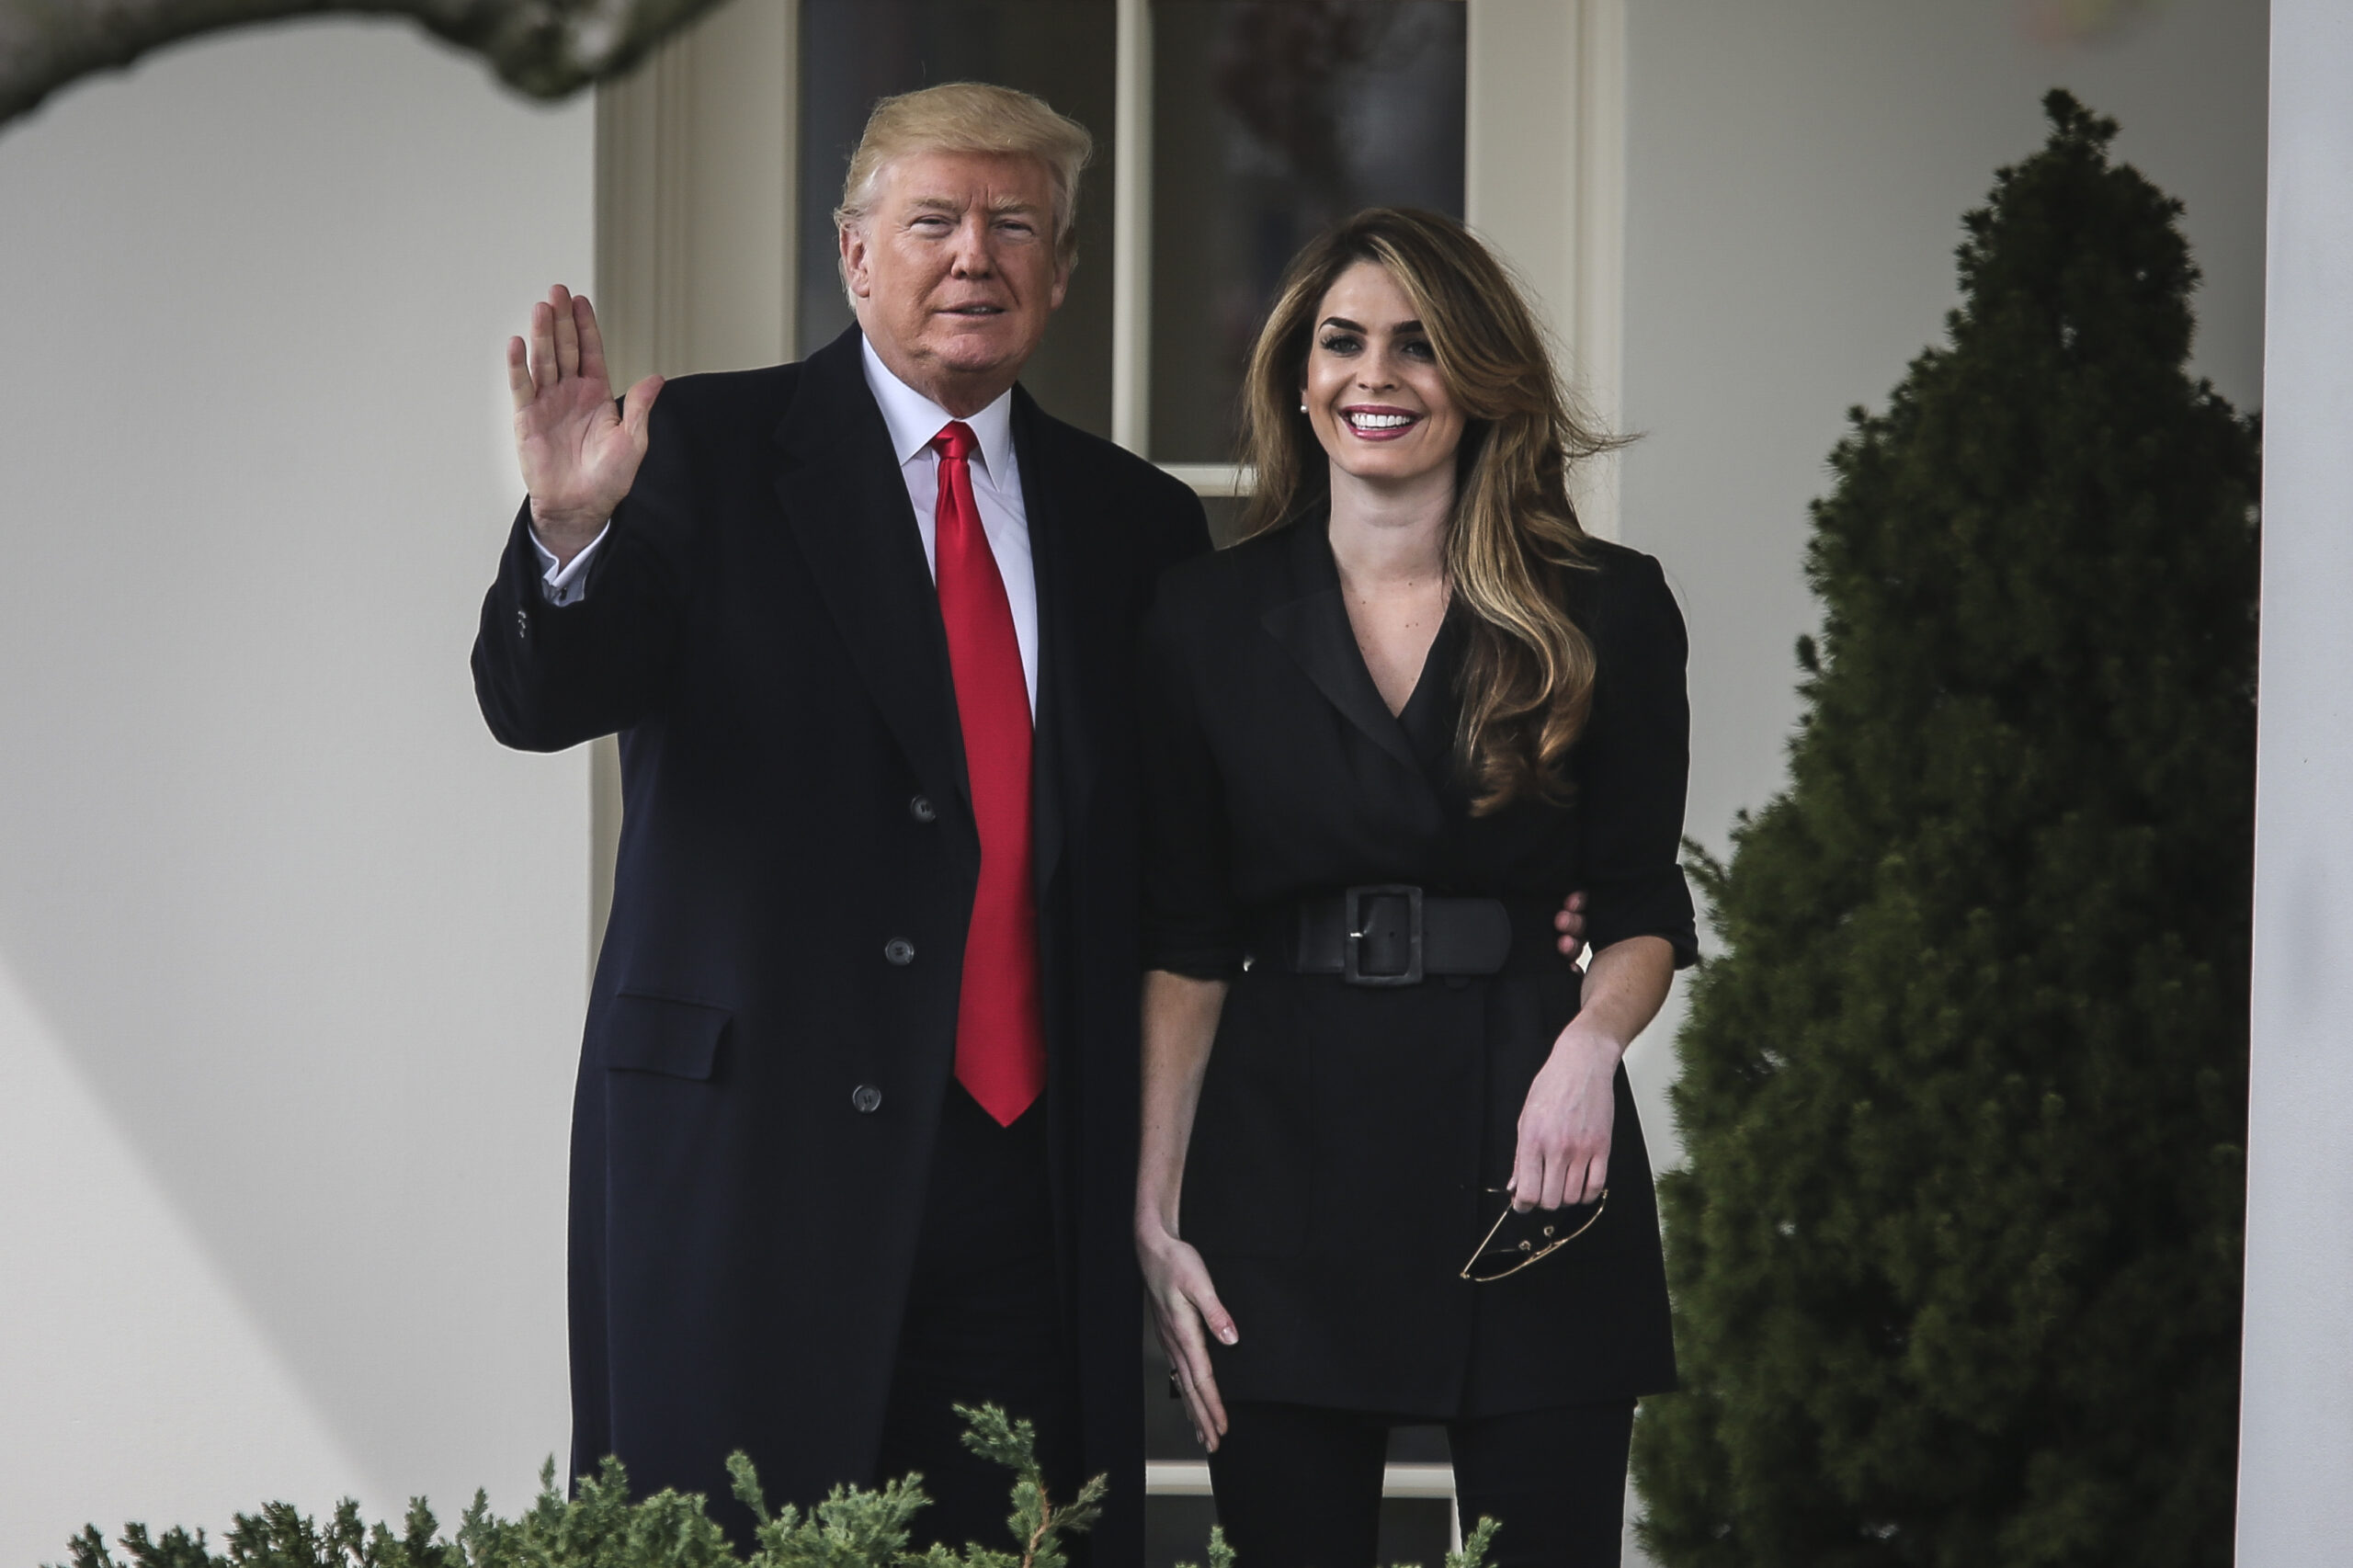 Newly-Released Texts Reveal Trump Confidant Hope Hicks Fuming After Jan. 6: ‘We All Look Like Domestic Terrorists’ (mediaite.com)